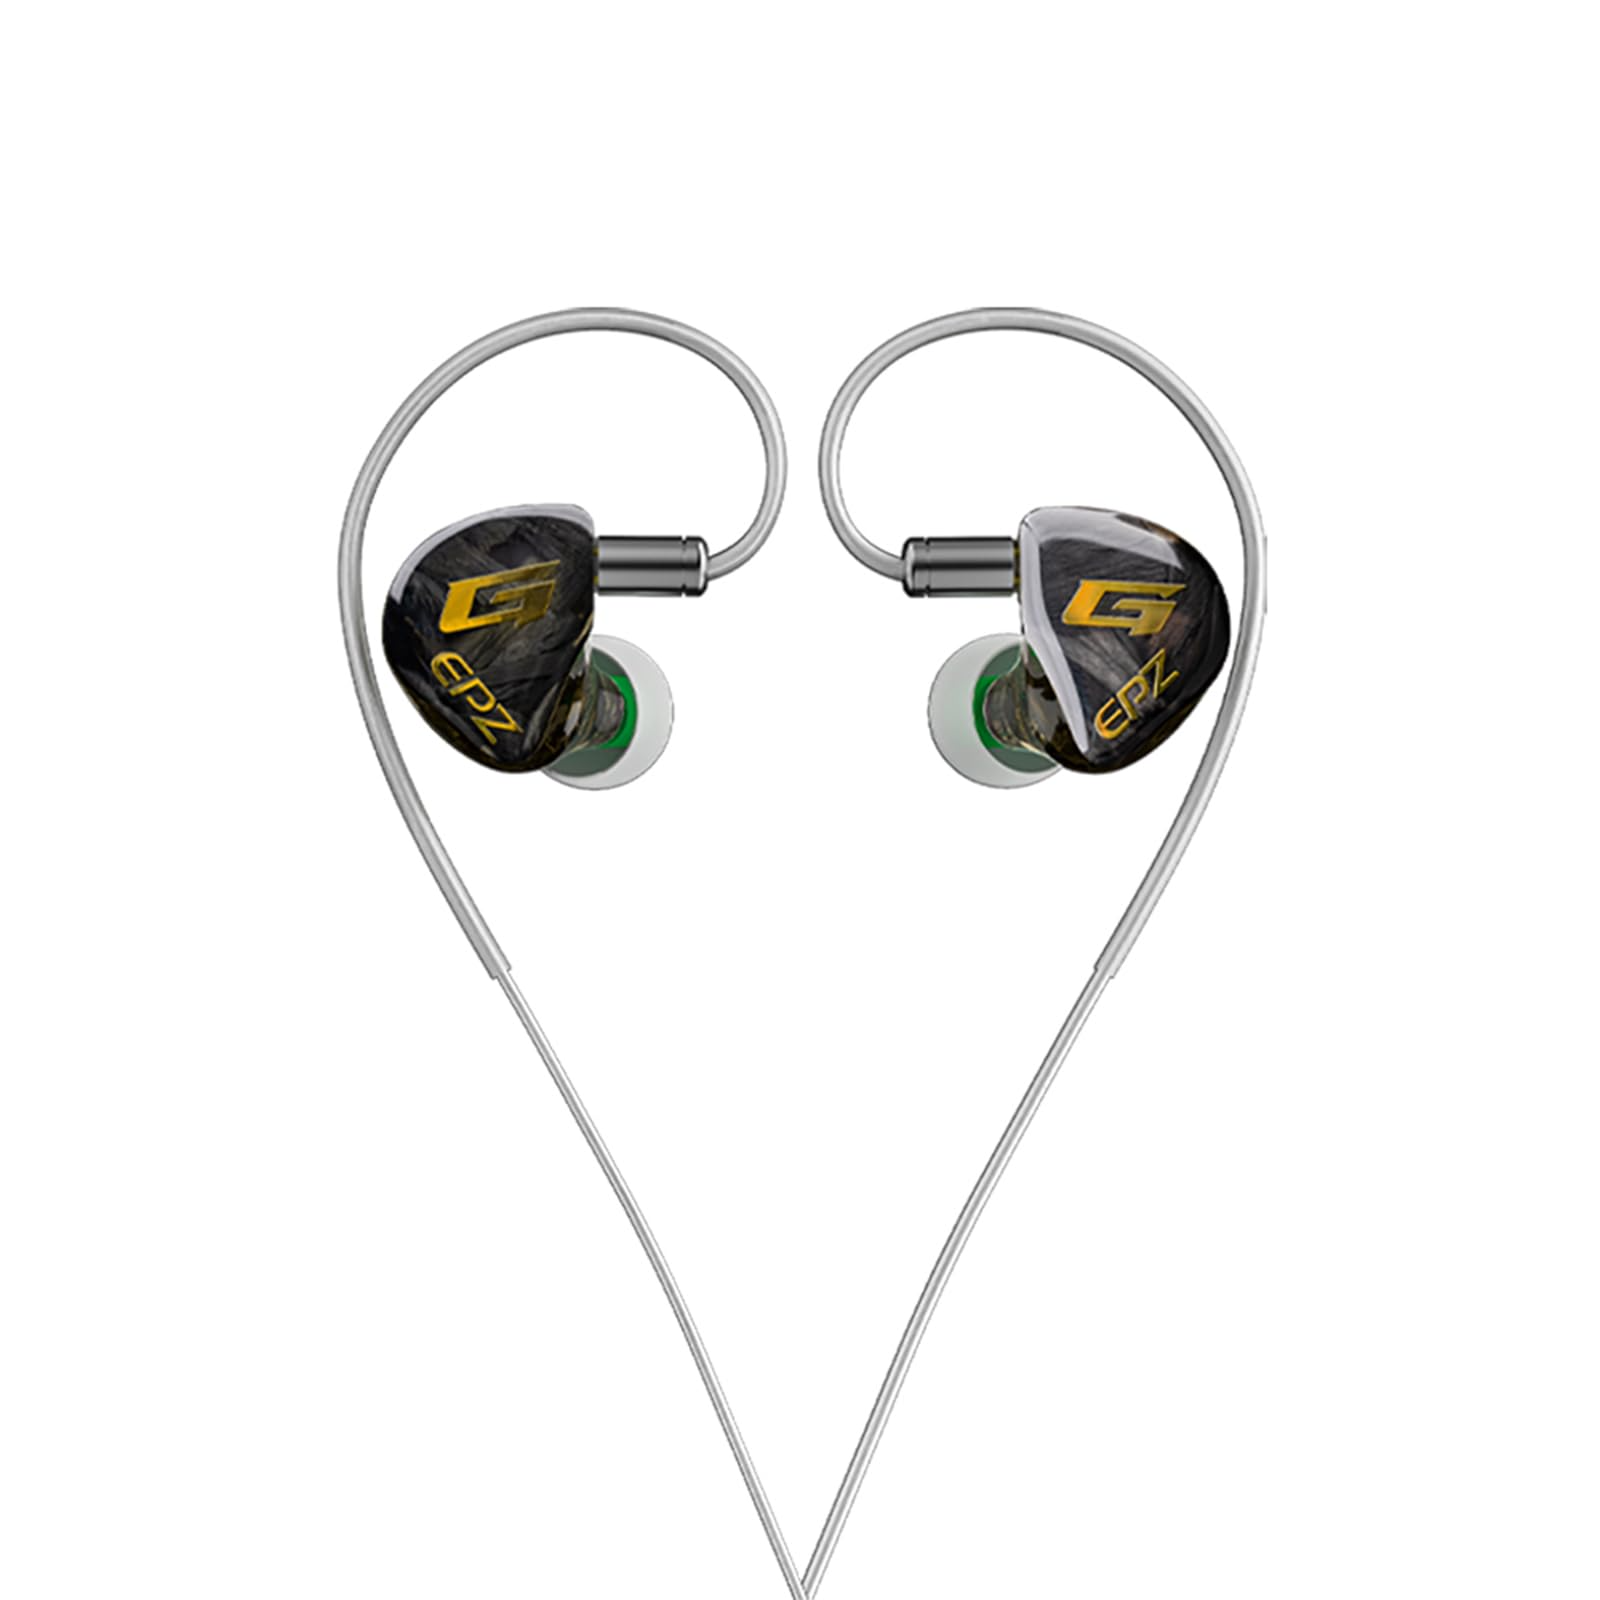 EPZ G10 - 10MM LCP Dynamic Driver IEM In Ear Monitor 0.78 2 Pin Detachable Cable Earbuds Gaming Headset